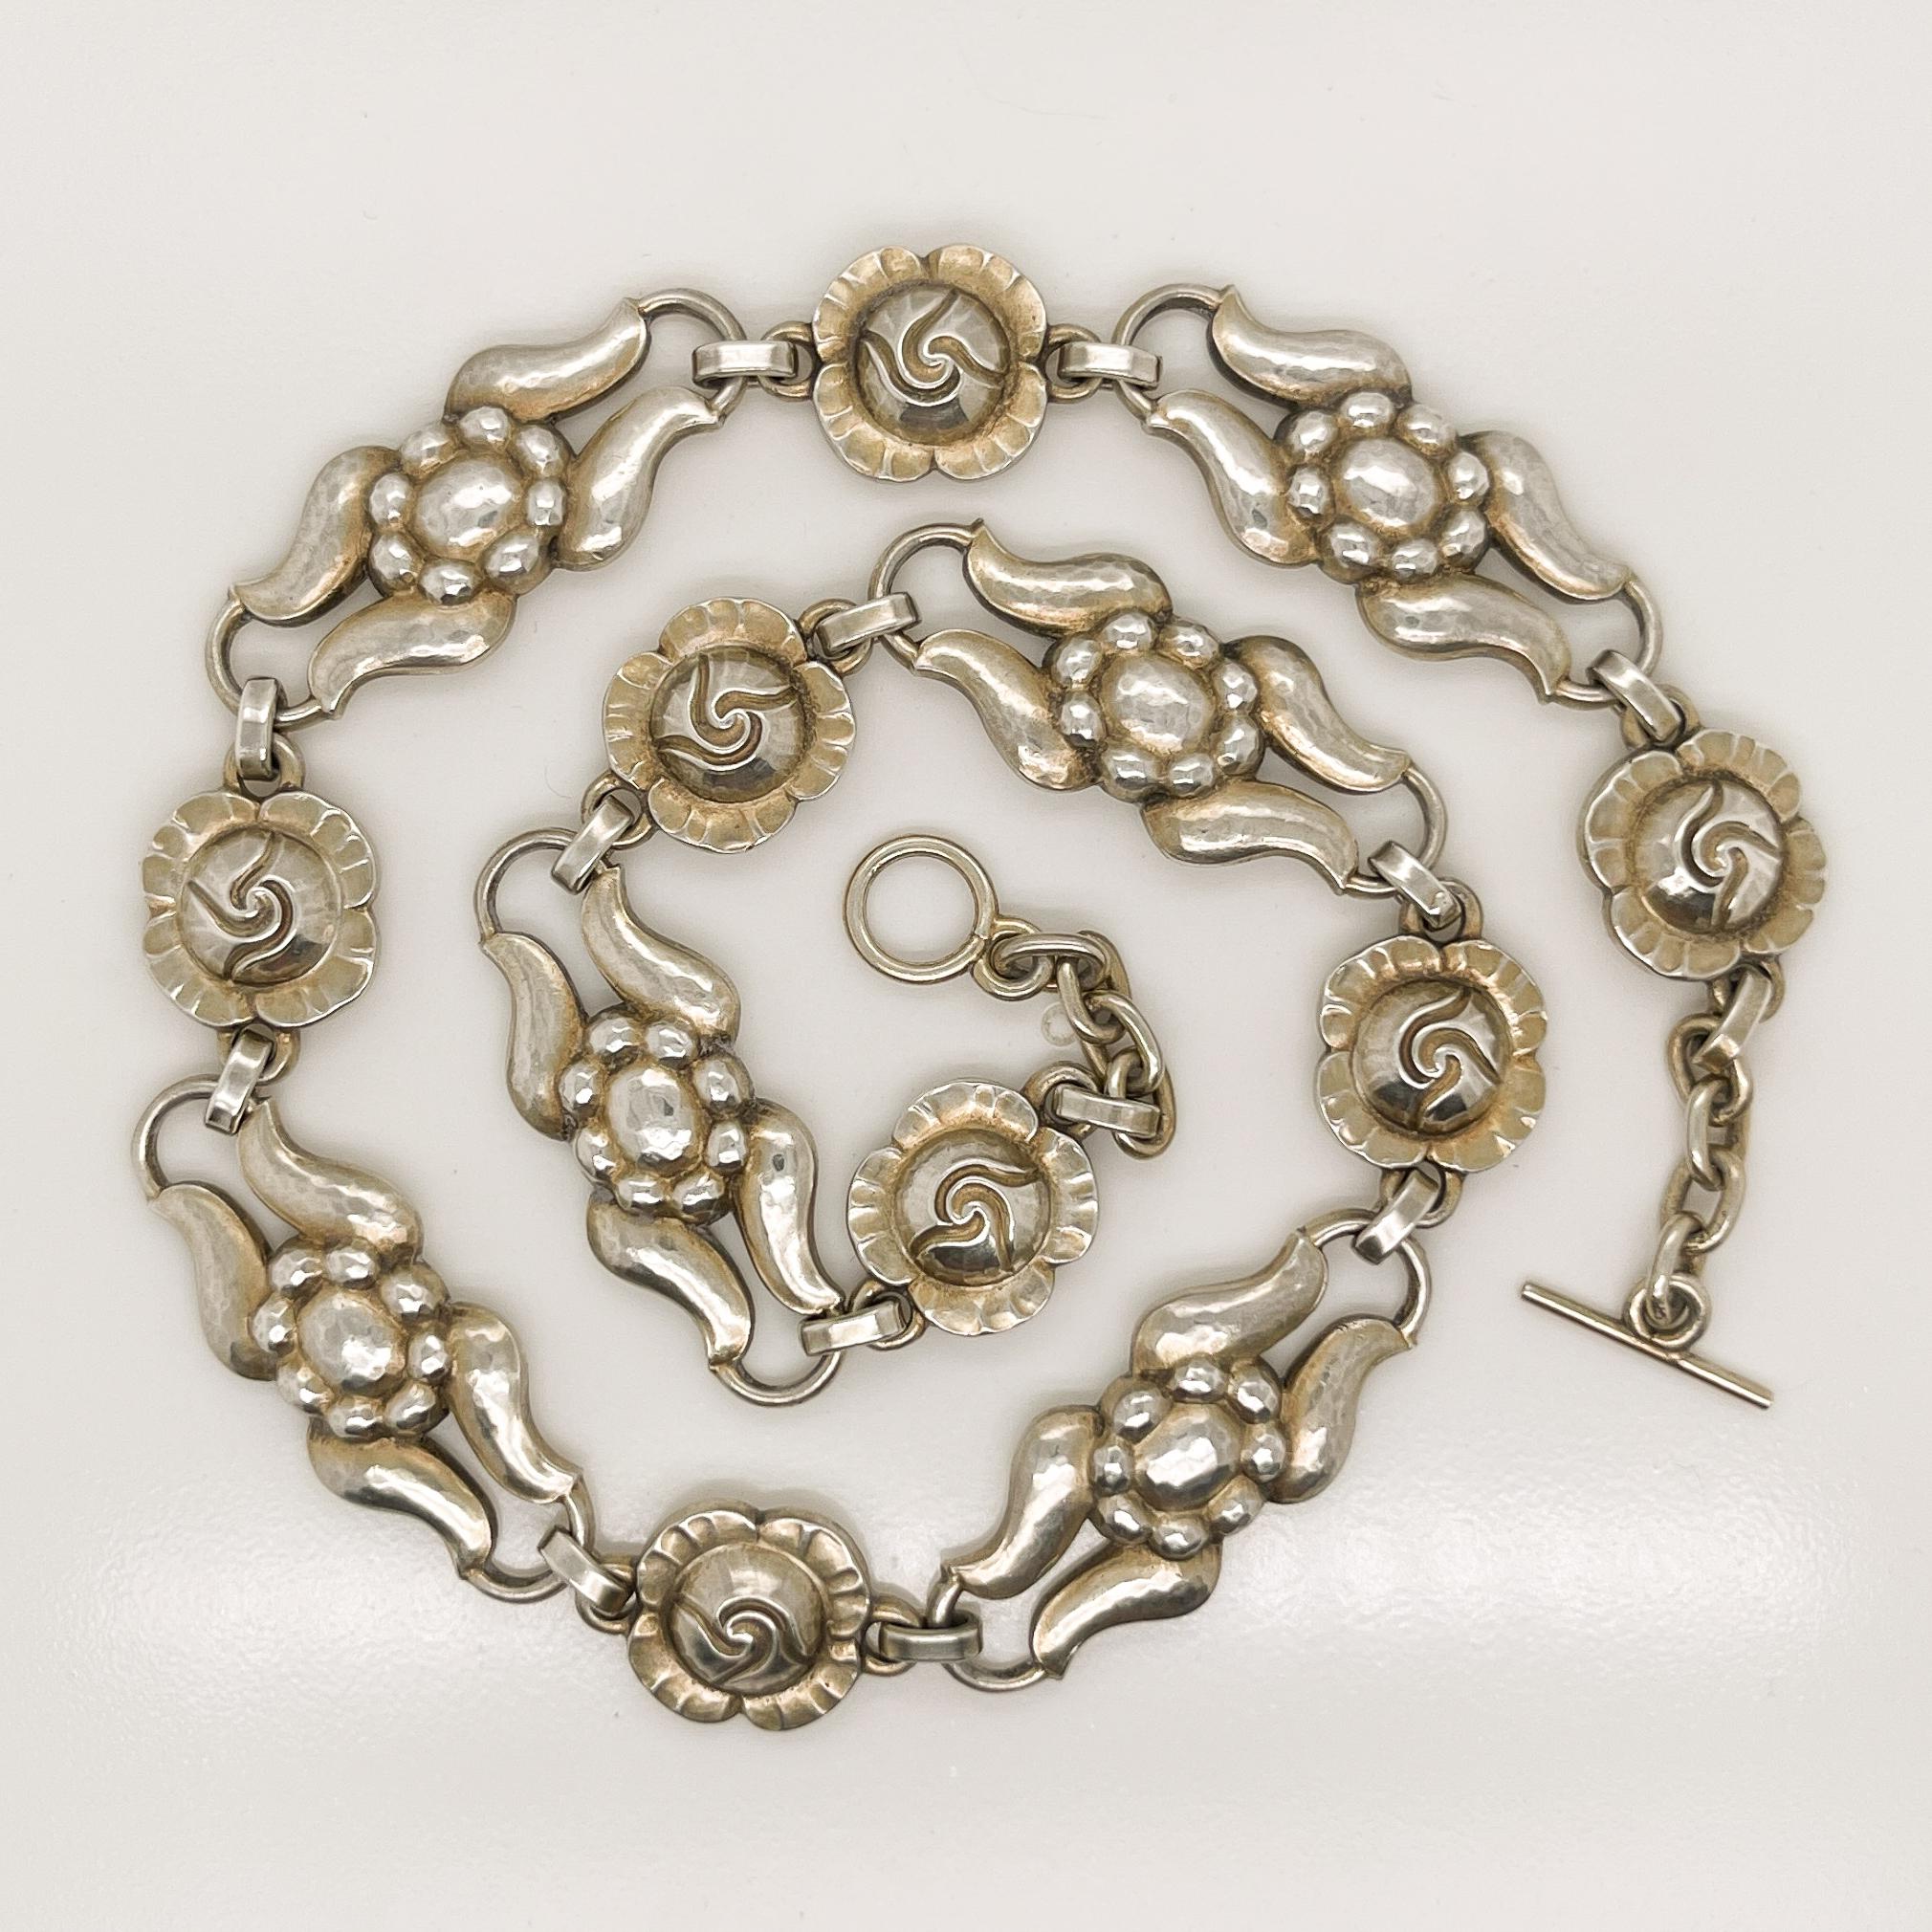 A very fine Georg Jensen necklace in sterling silver.

Model No. 10.

With alternating rose and stylized floral links, traces of its original gilding, and a toggle clasp.

Designed by Georg Jensen and bearing an old GI mark.

At approximately 14 1/2